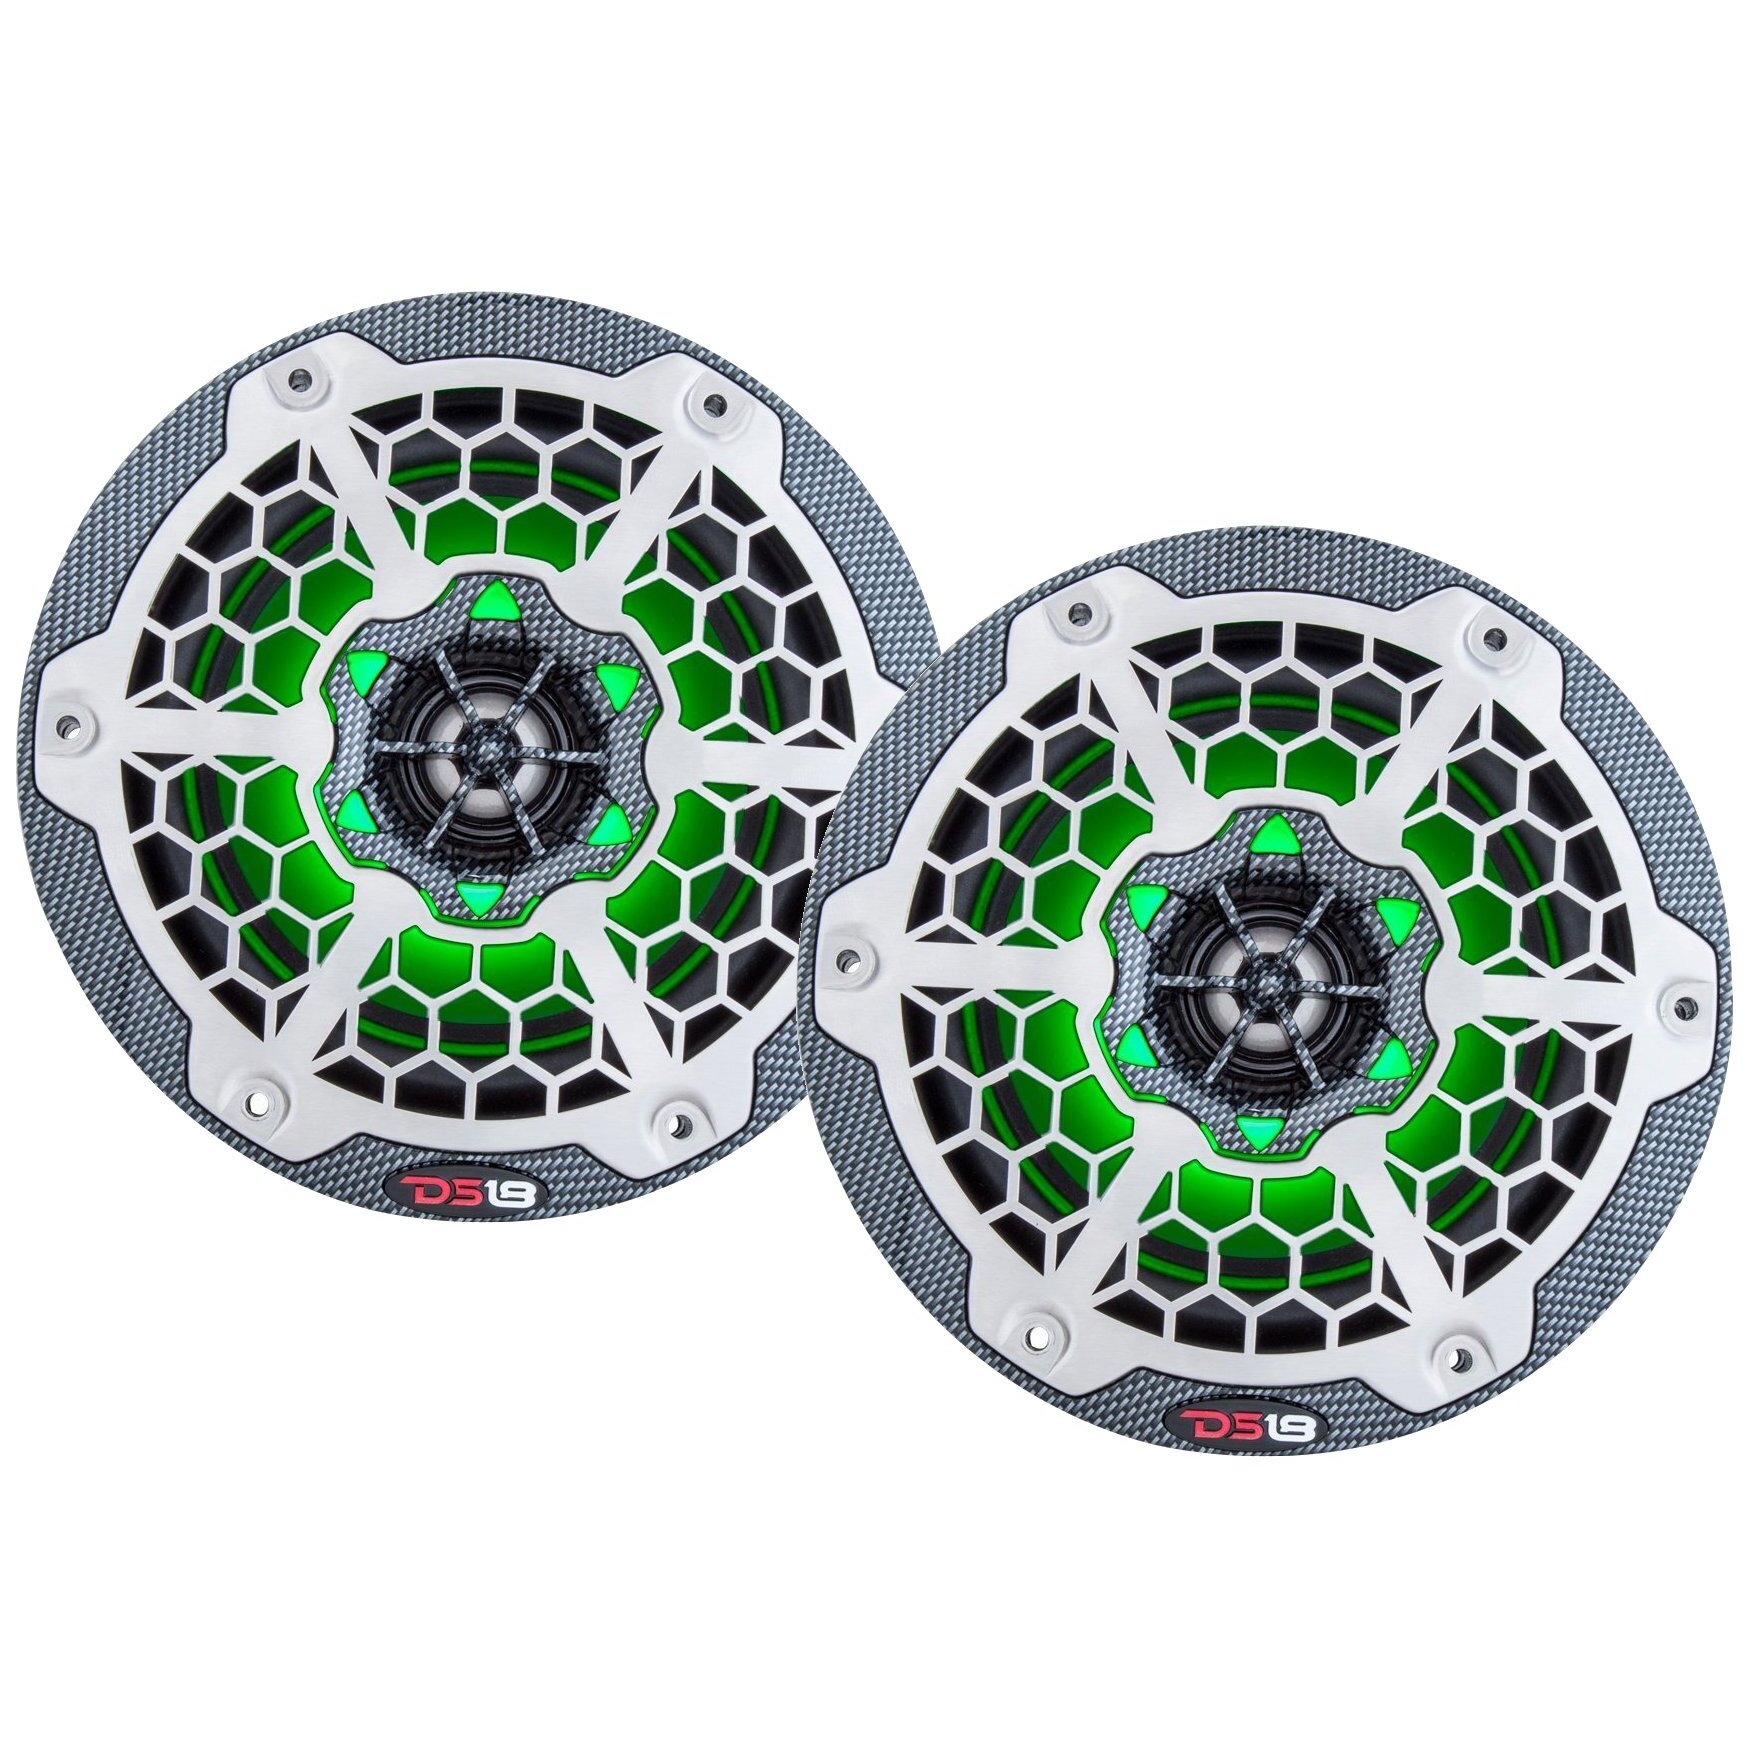 DS18 CF8 Black And Silver 8" 450 Watt Waterproof Marine Speakers With RGB LED Accent Lighting